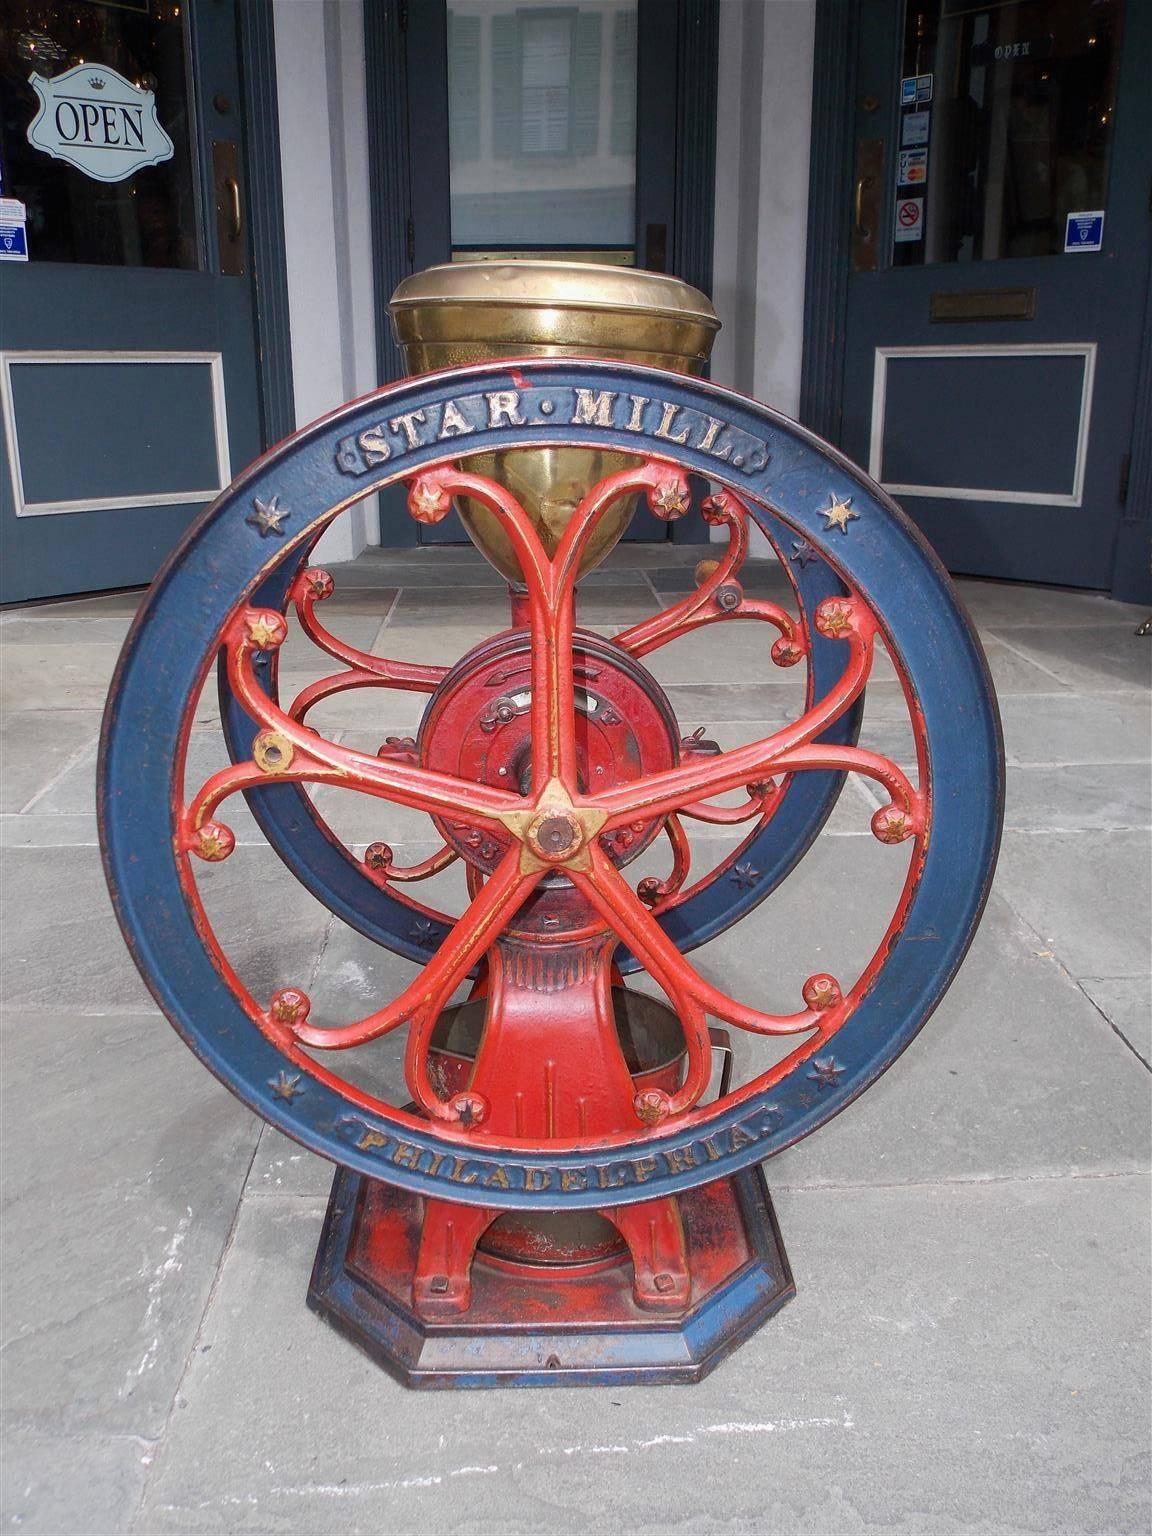 American cast iron coffee grinder with the original blue and red paint. Grinder has the original brass hopper, wood handle, and catch pail as well. Model # 10, Star Mill, Philadelphia, Late 19th Century.